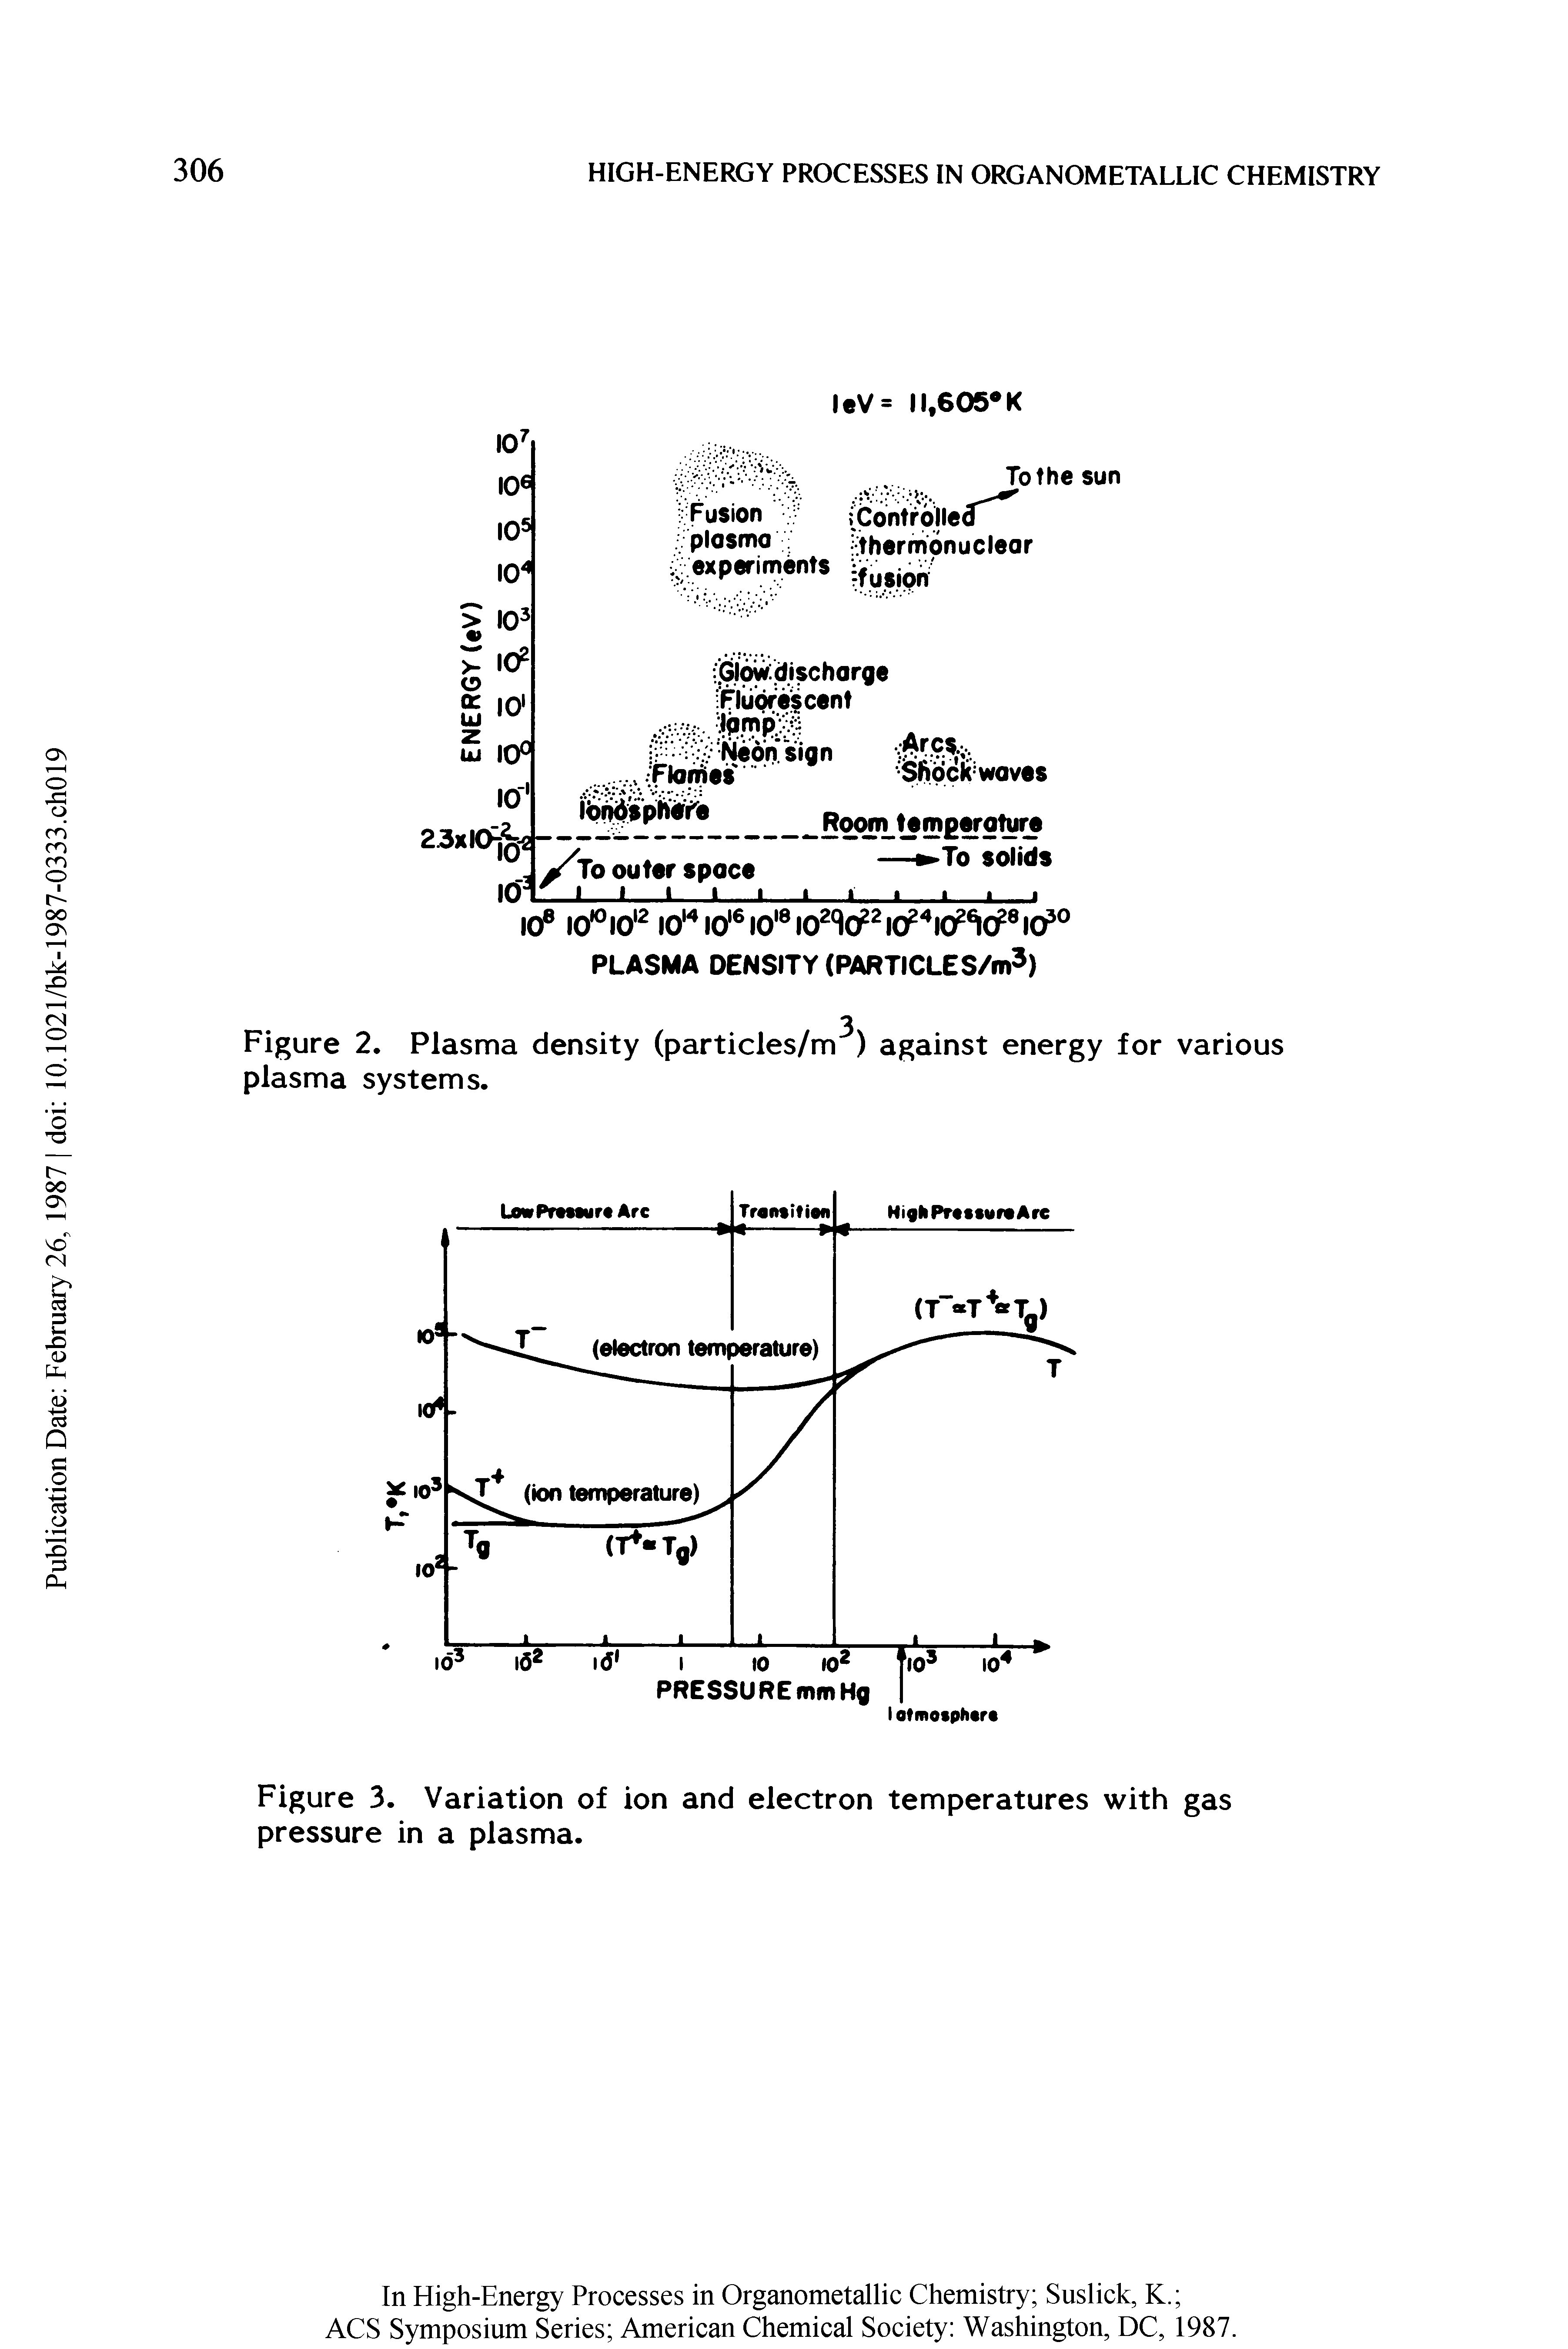 Figure 3. Variation of ion and electron temperatures with gas pressure in a plasma.